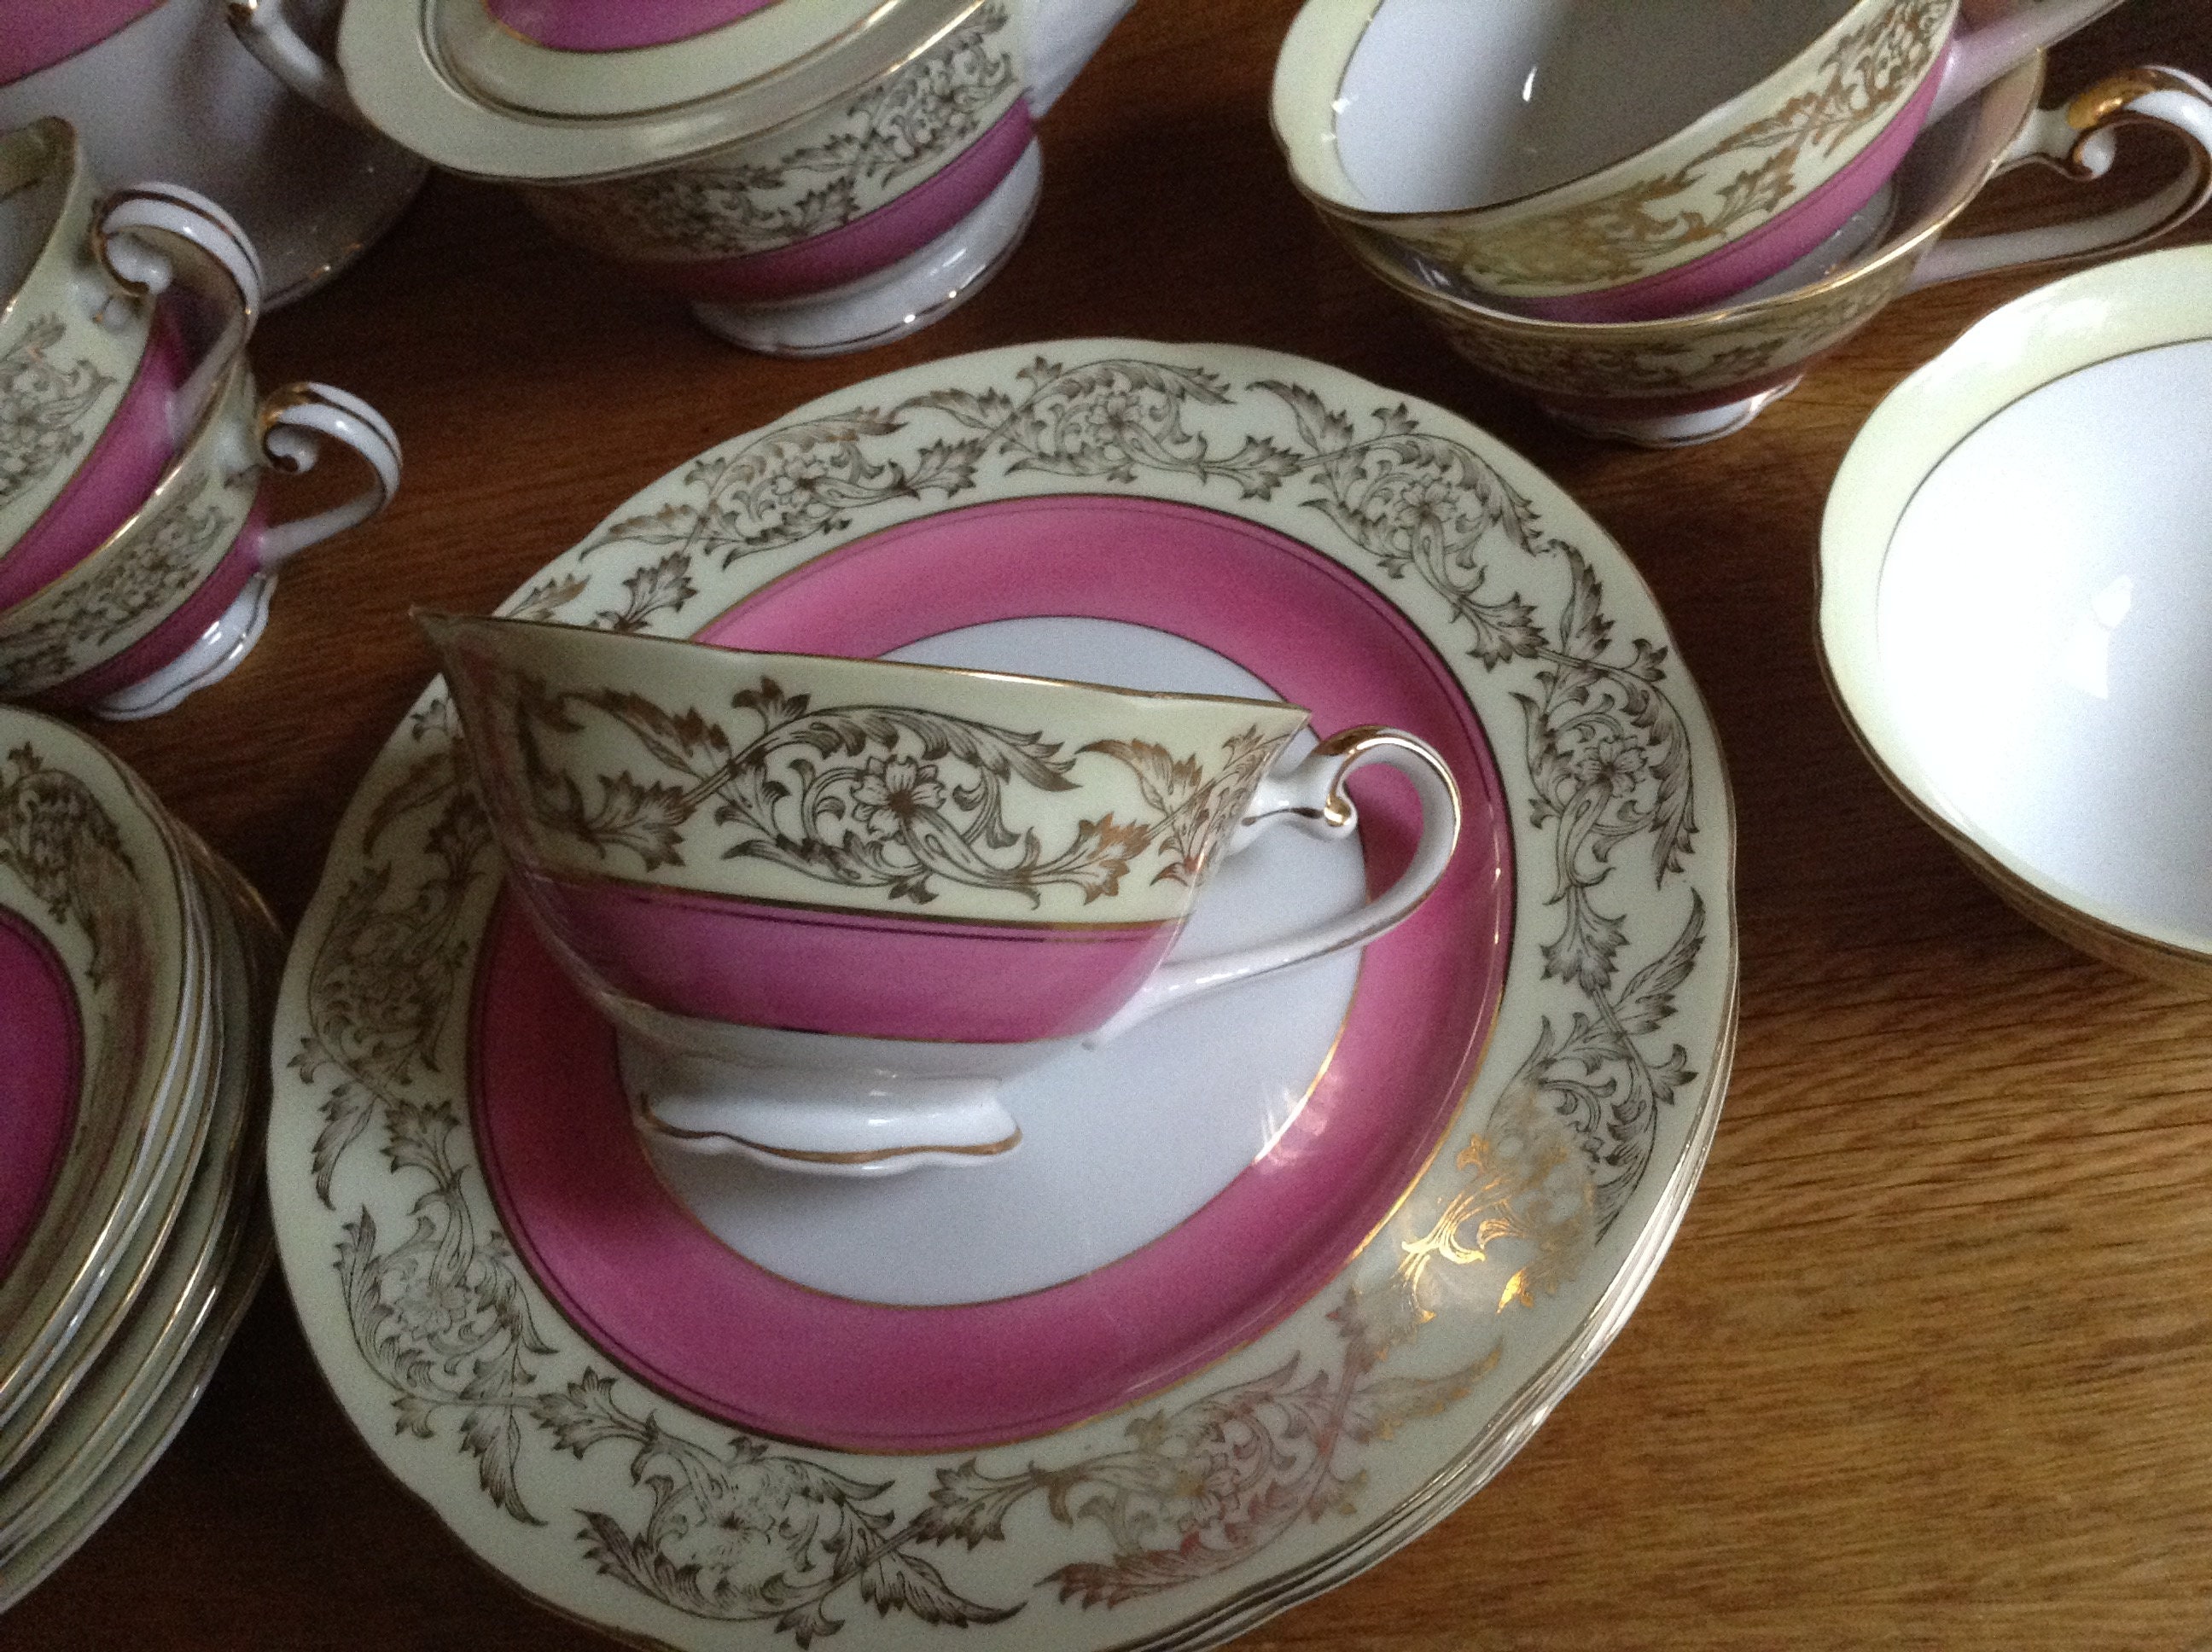 Tokyo China Japanese Teaset Complete pink and cream with gilded gold design